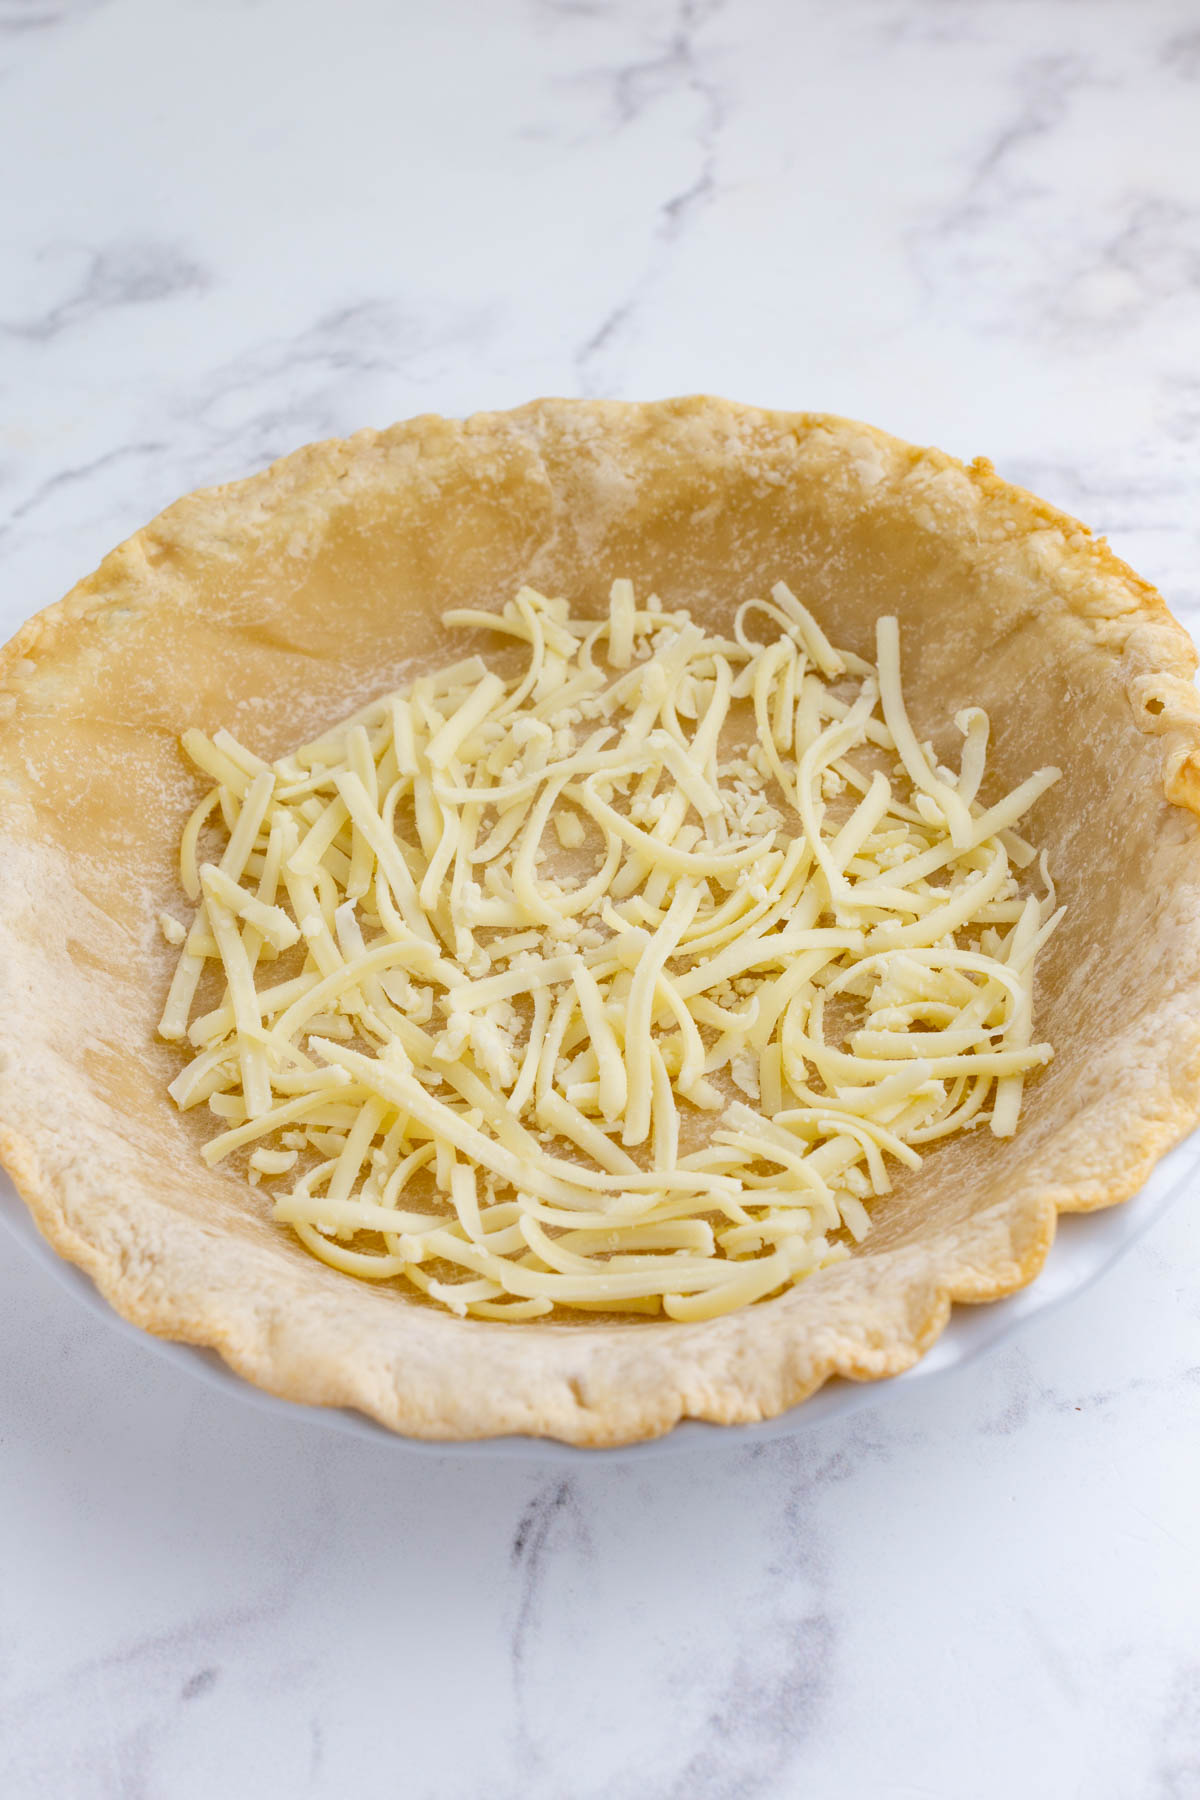 Cheese is added to a pie crust.